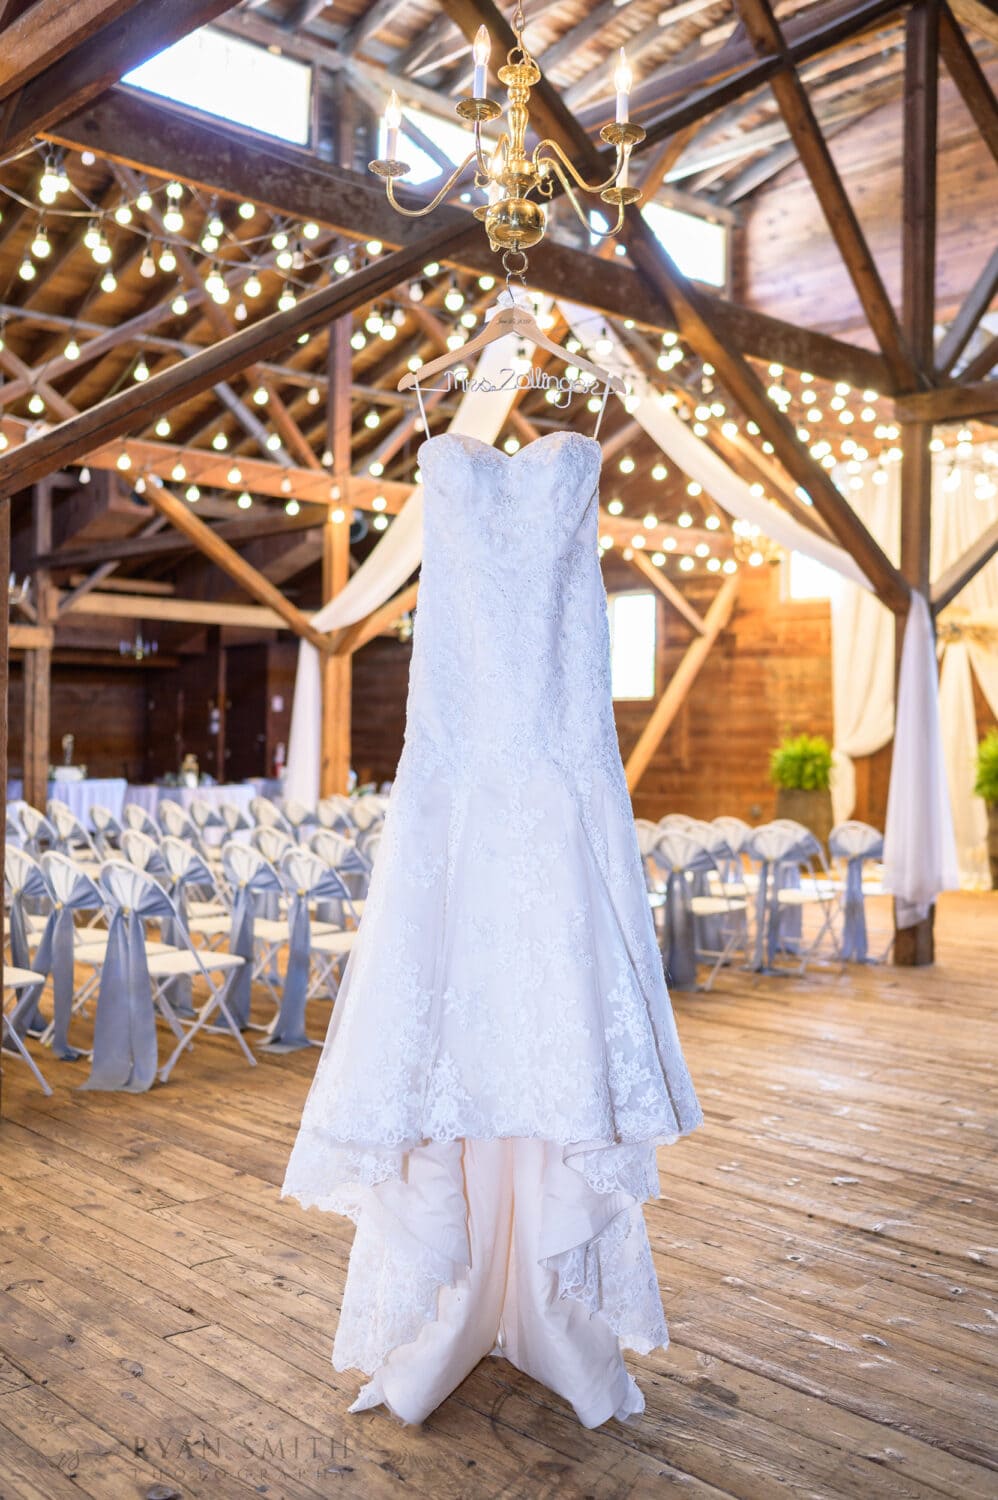 Brides dress hanging with the lights - The Peanut Warehouse - Conway